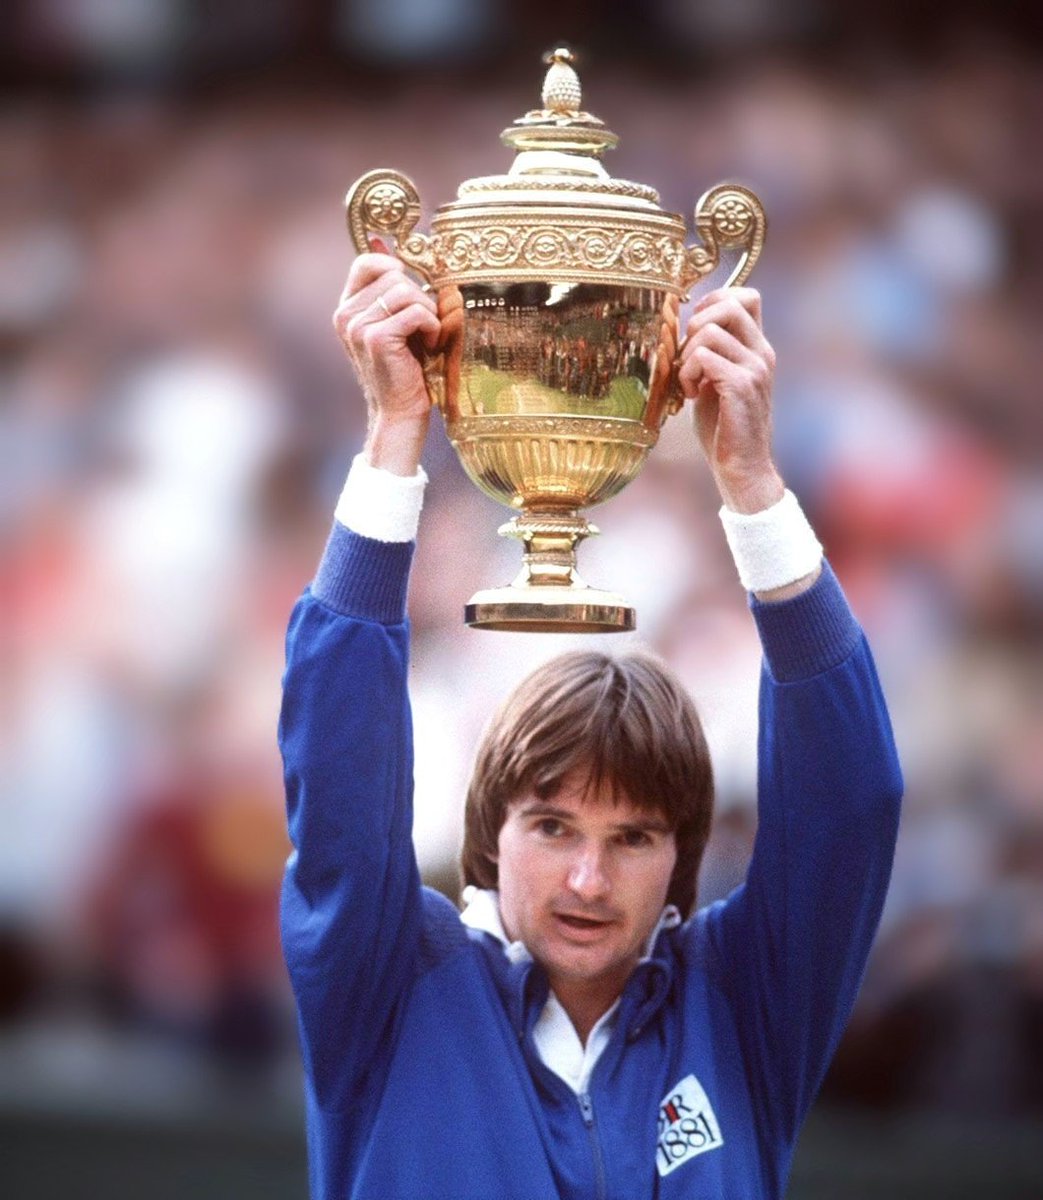 If Jimmy Connors was the worst president, why did they give him this big trophy, Donald?